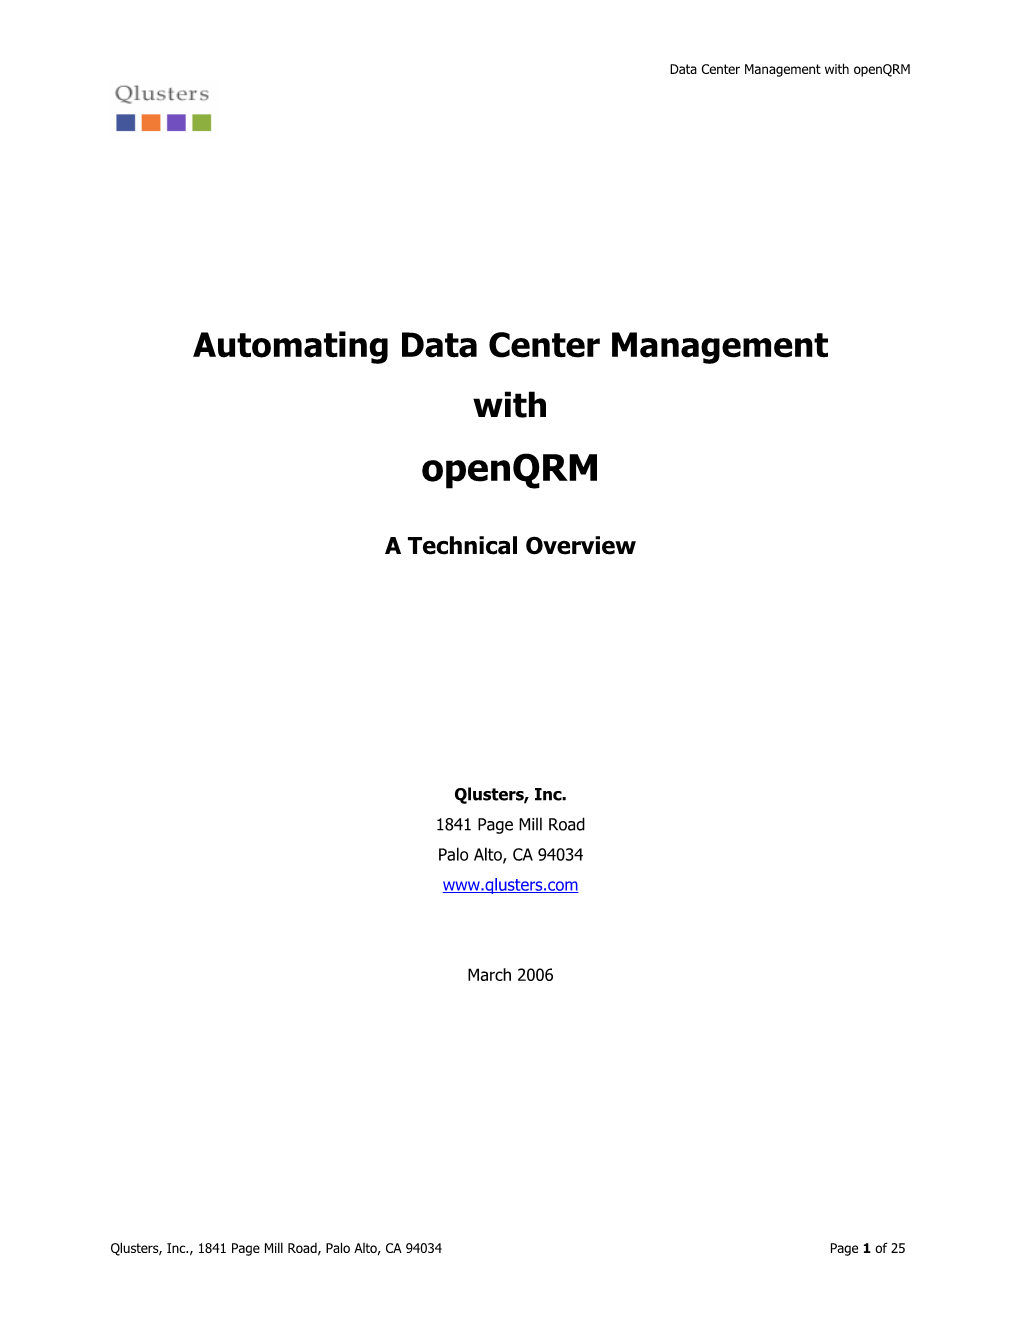 Automating Data Center Management with Openqrm